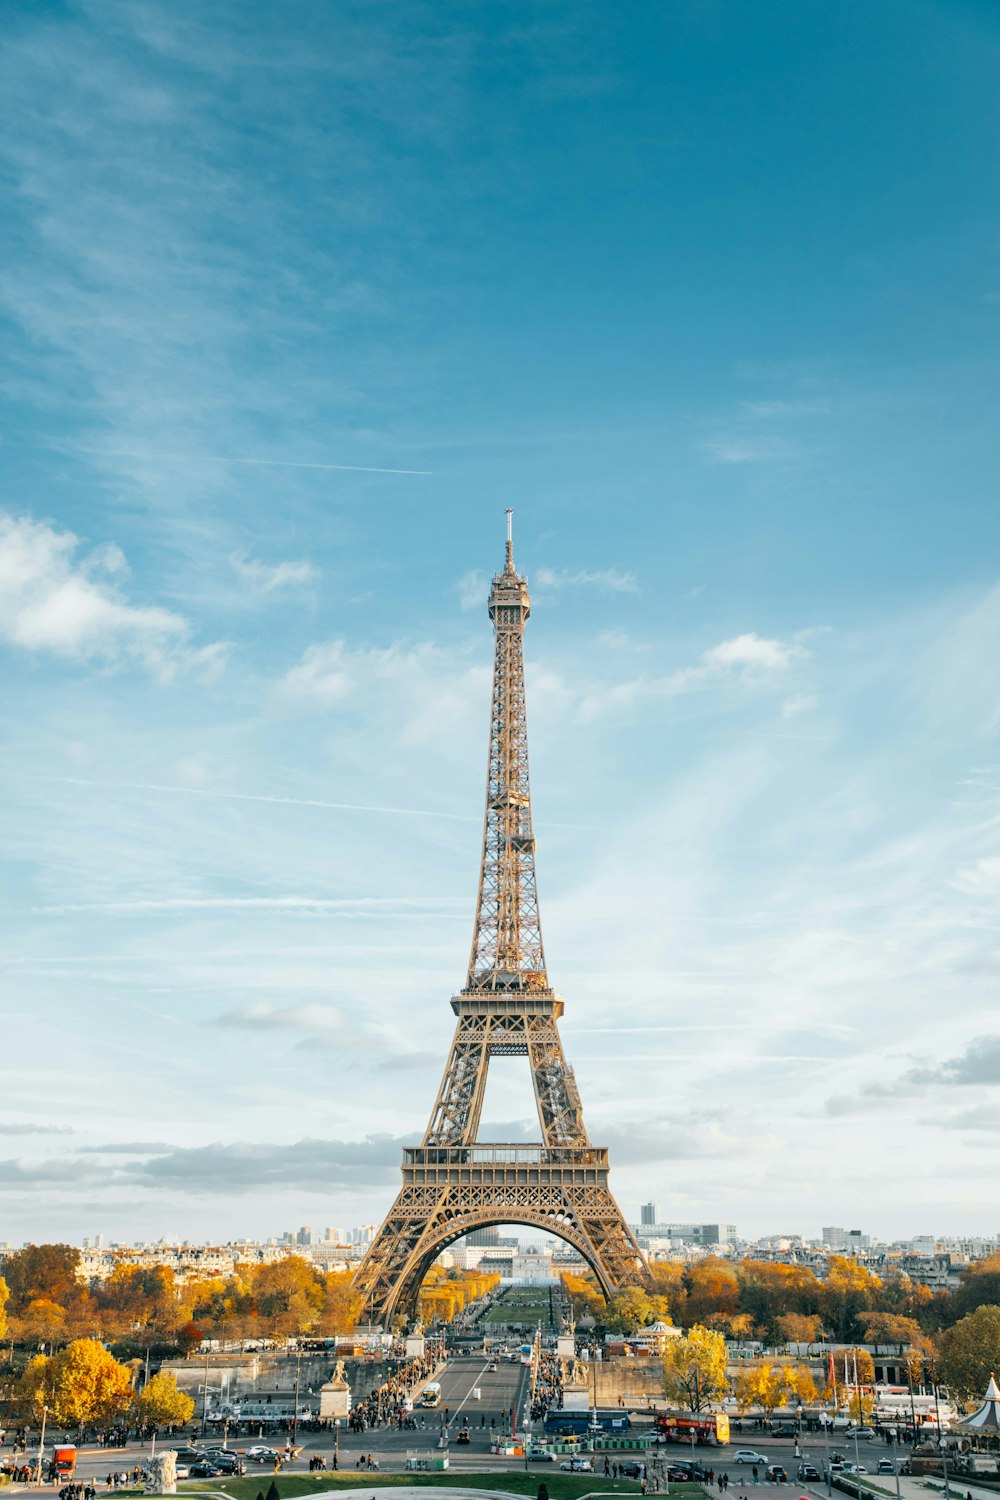 100 Eiffel Tower Images France HD Download Free Images on